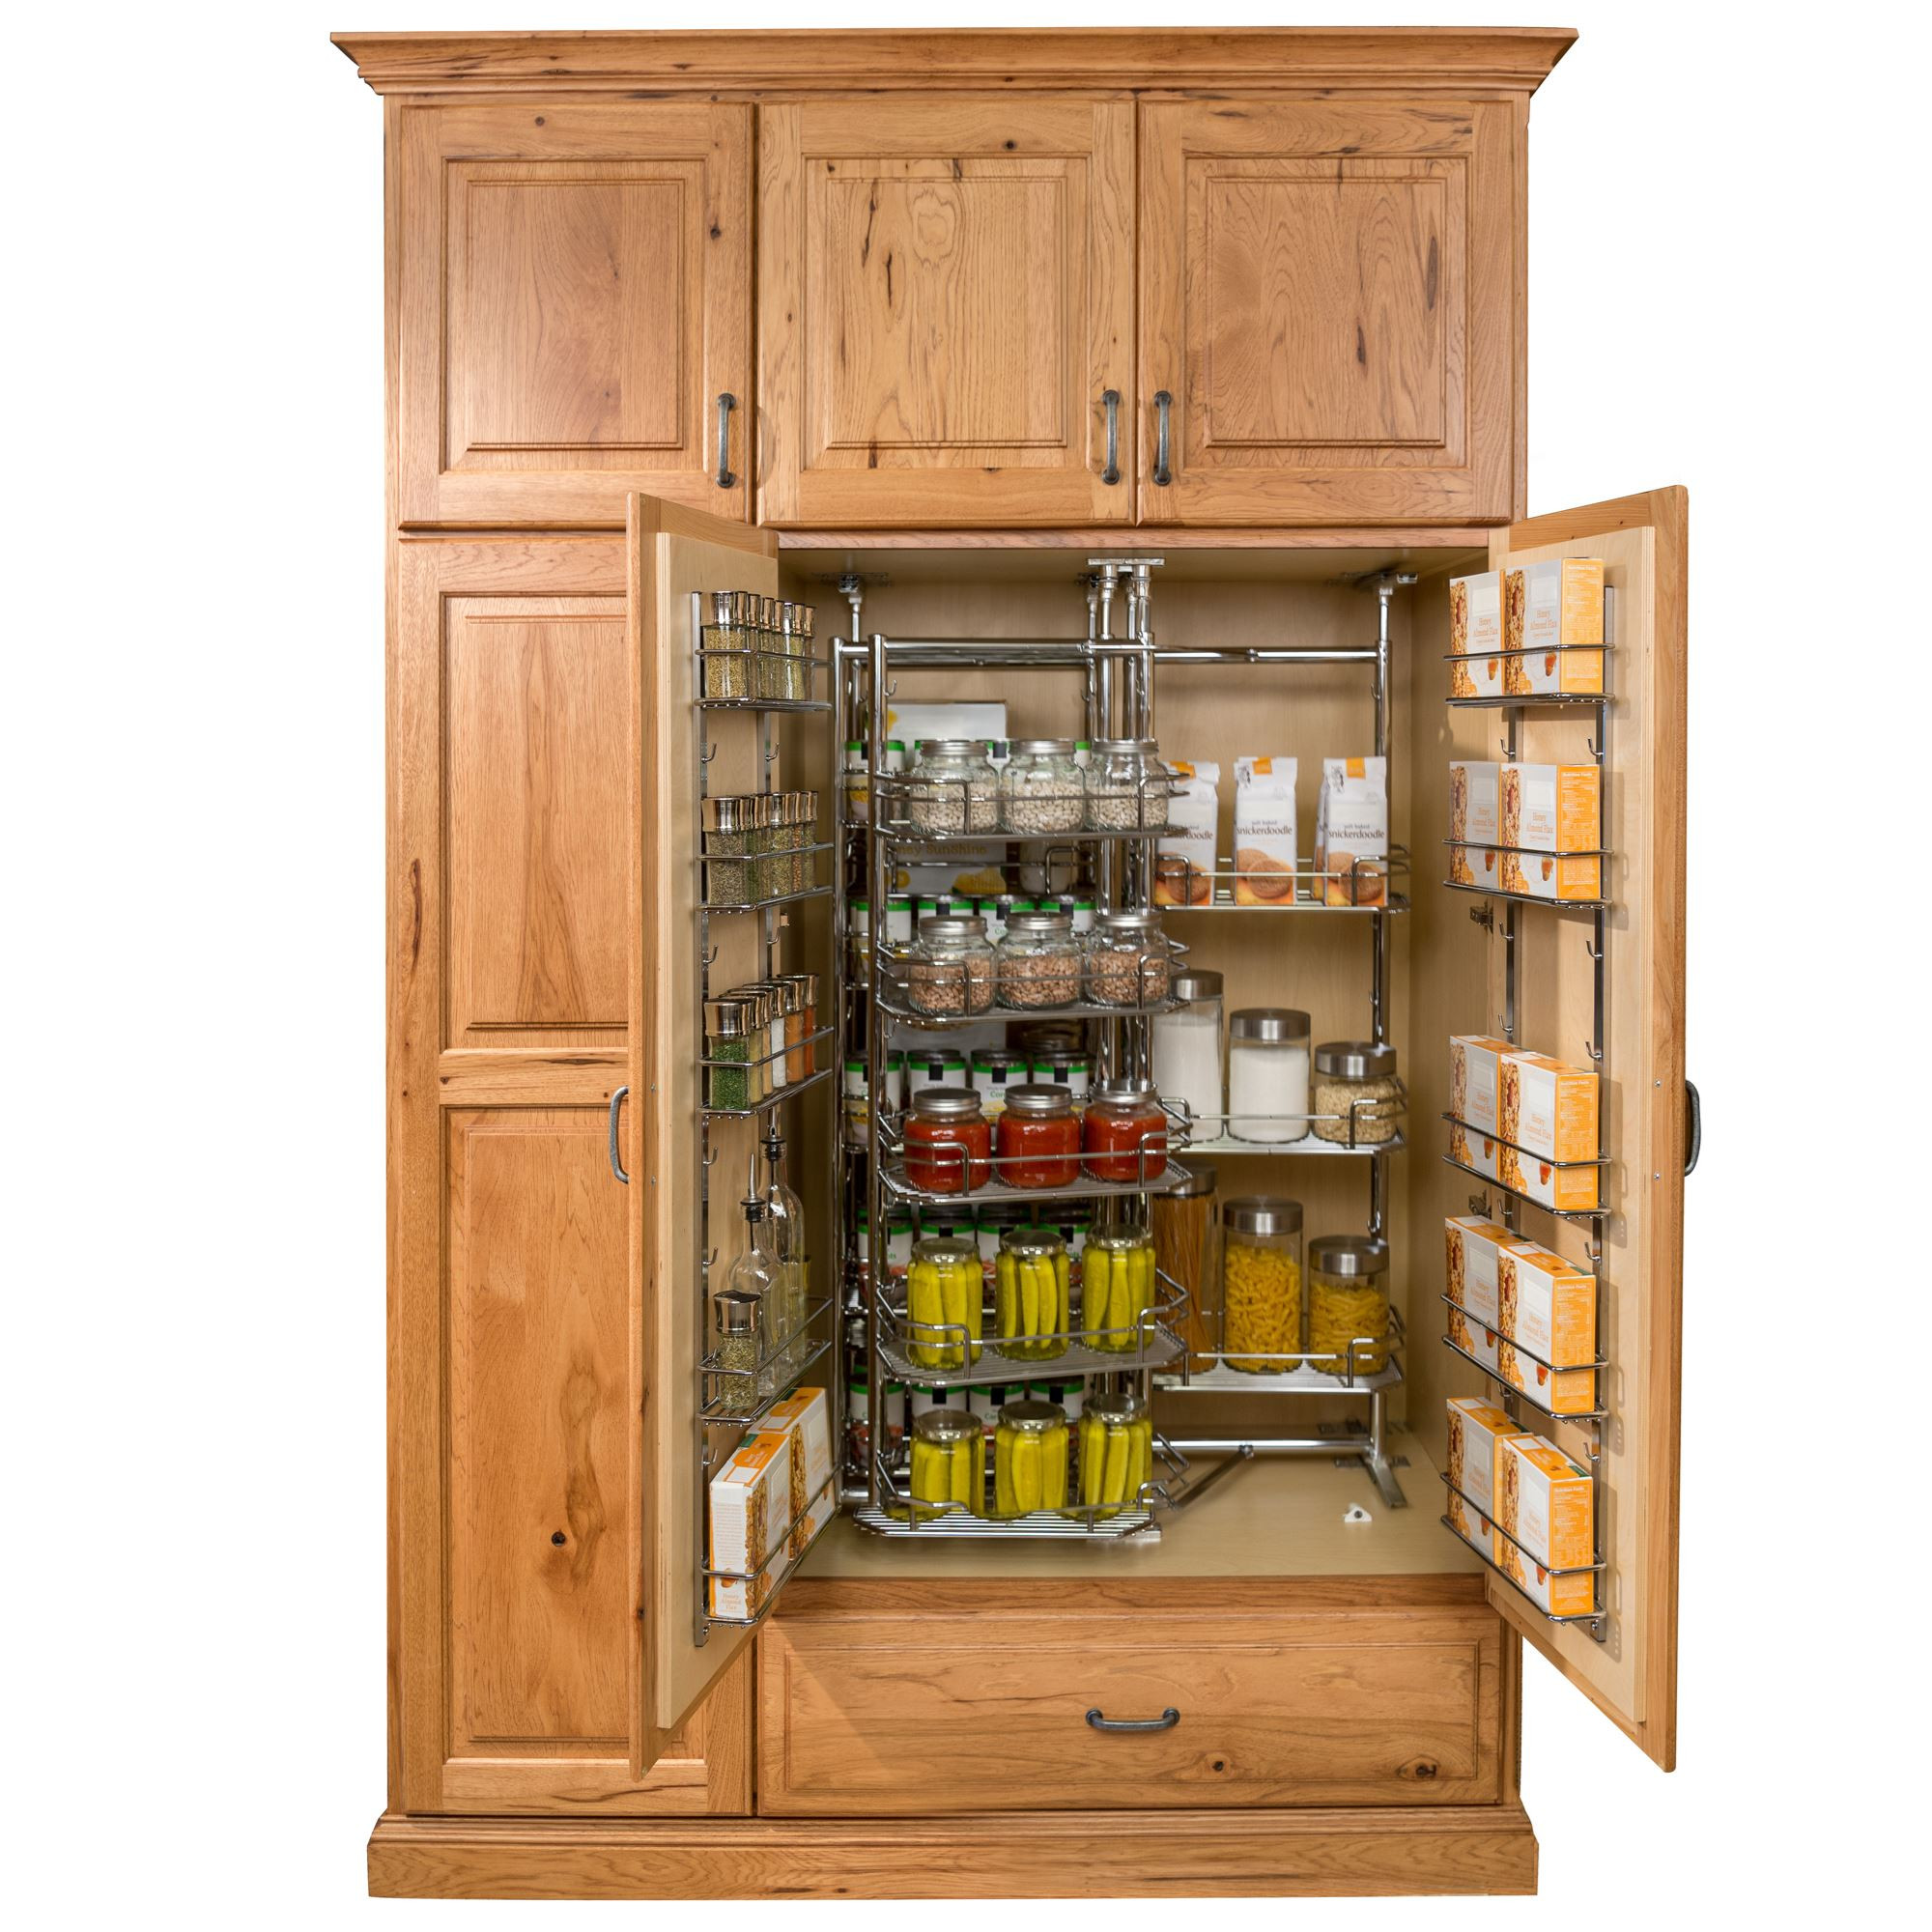 Wooden Kitchen Storage Cabinets
 Pantry and Food Storage Storage Solutions